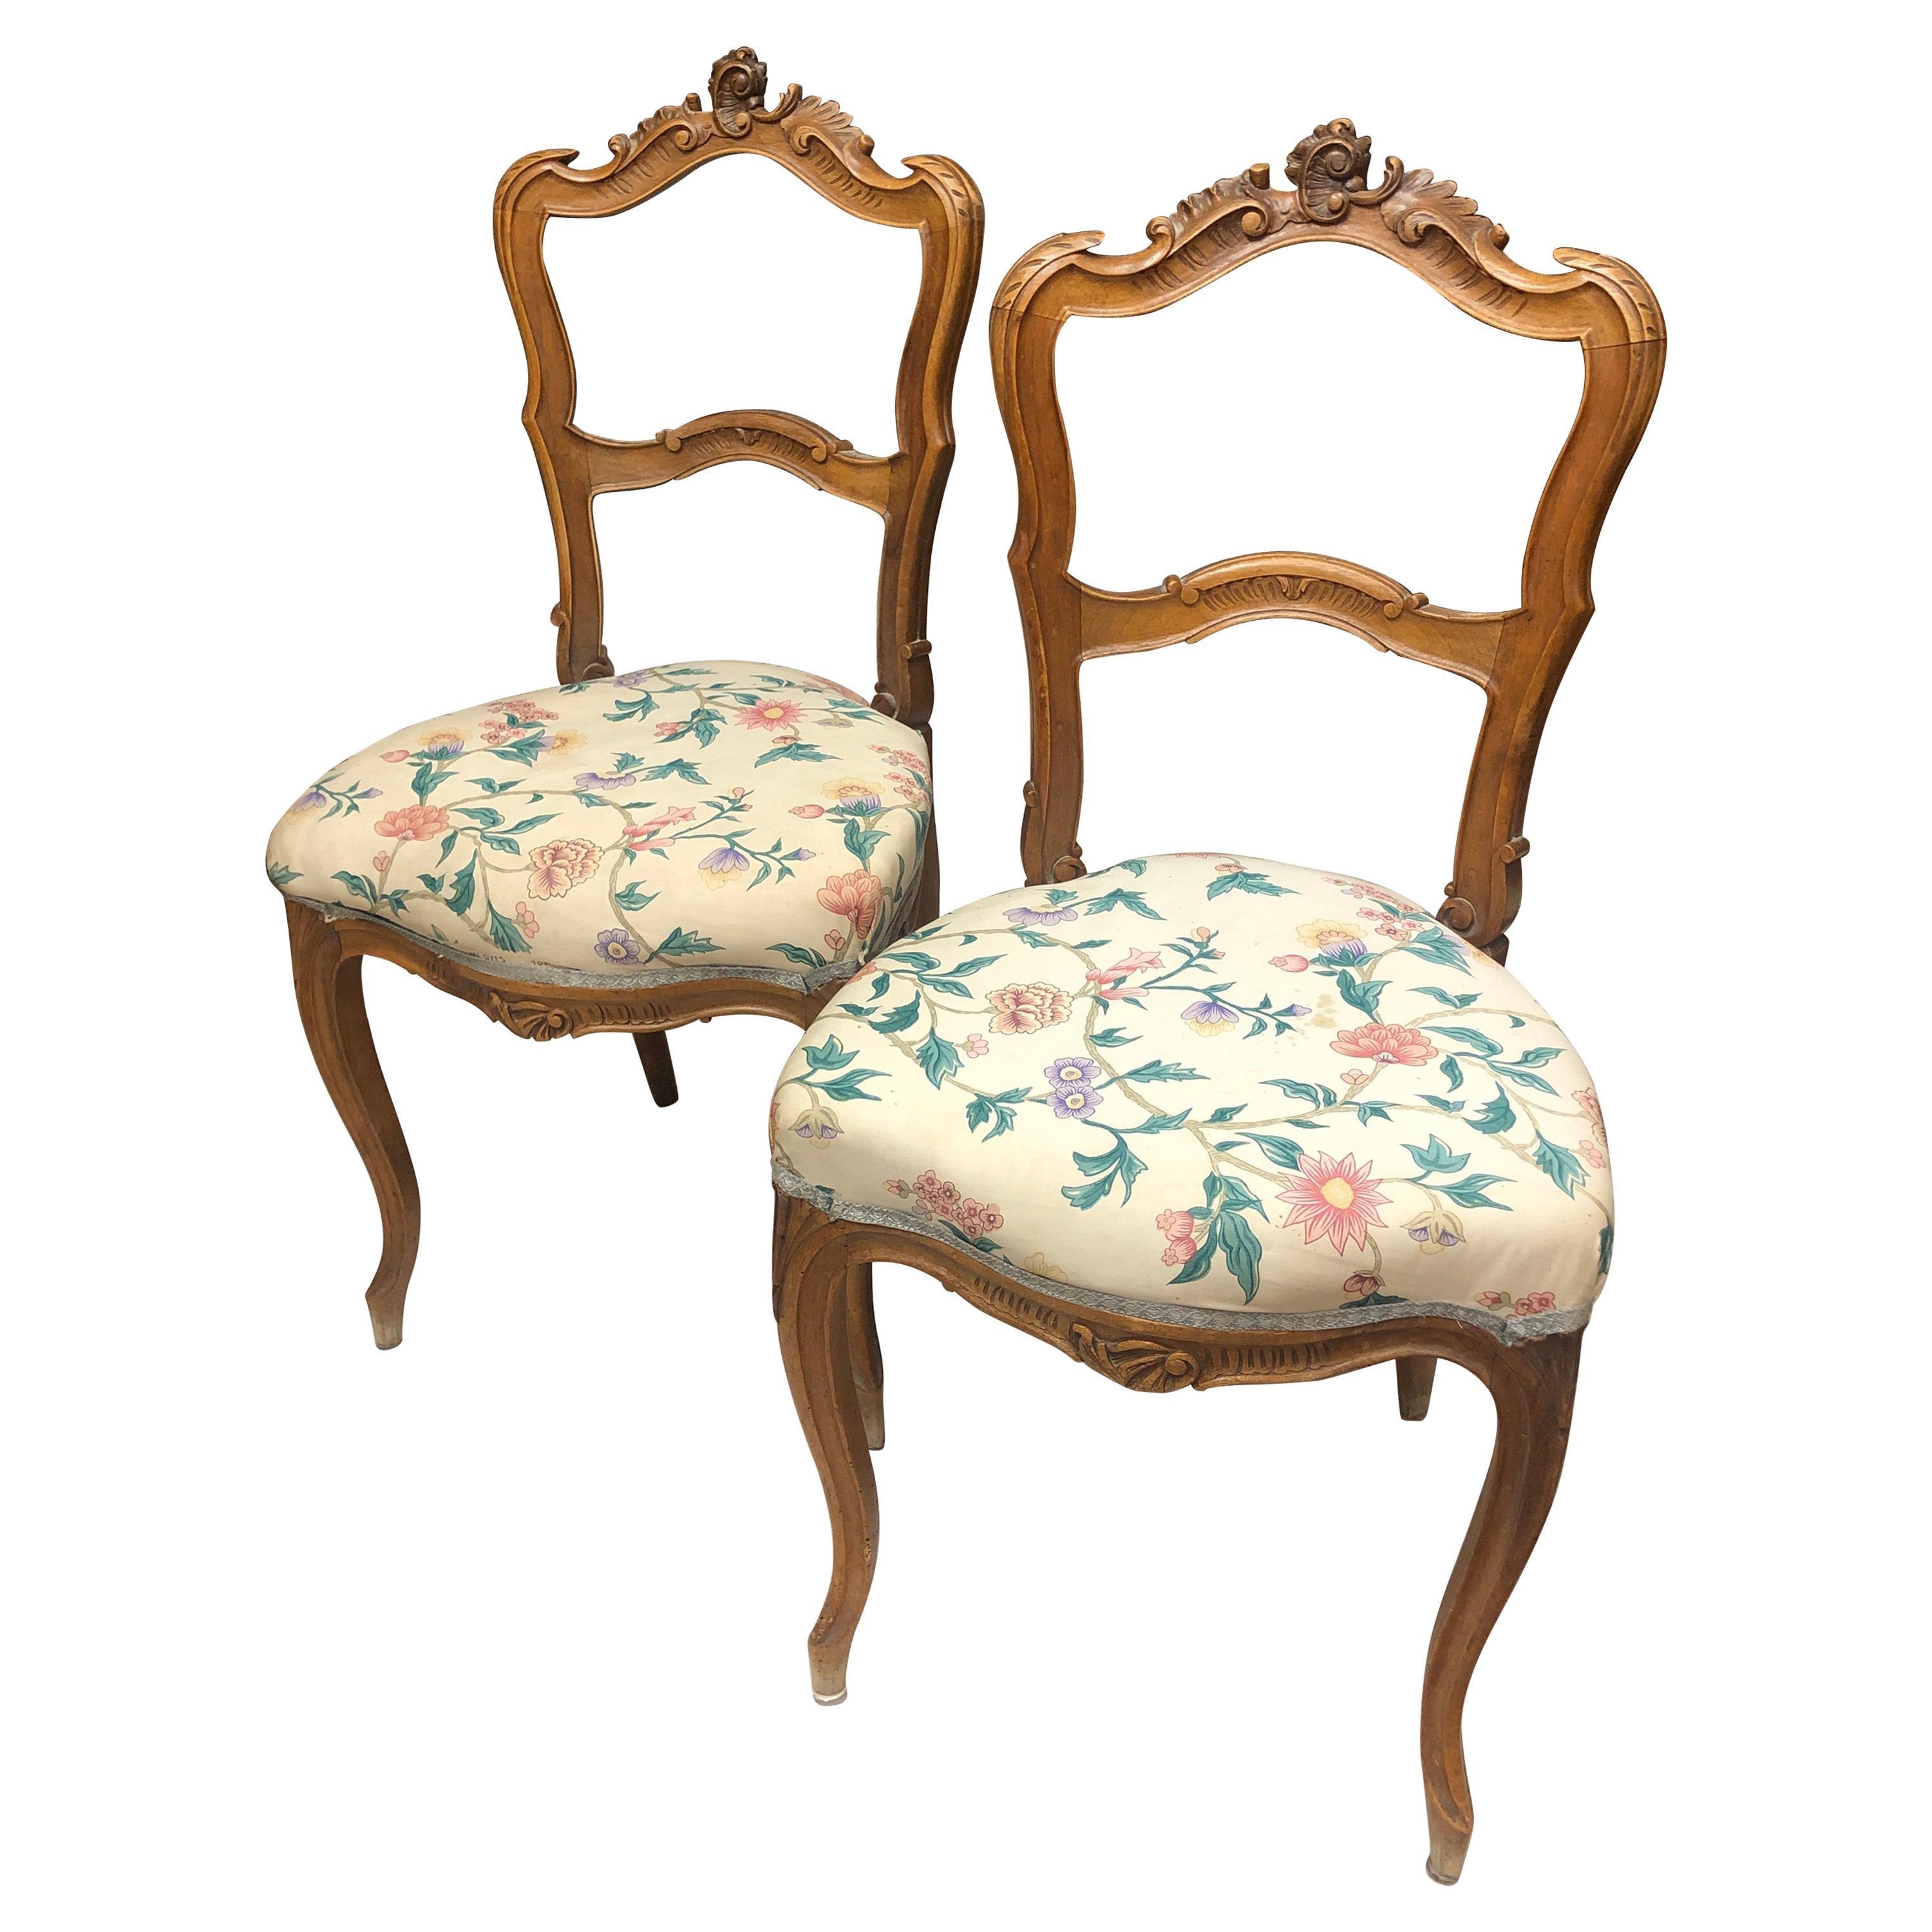 19th Century French Walnut Hand Carved Chairs in Louis XV Style For Sale